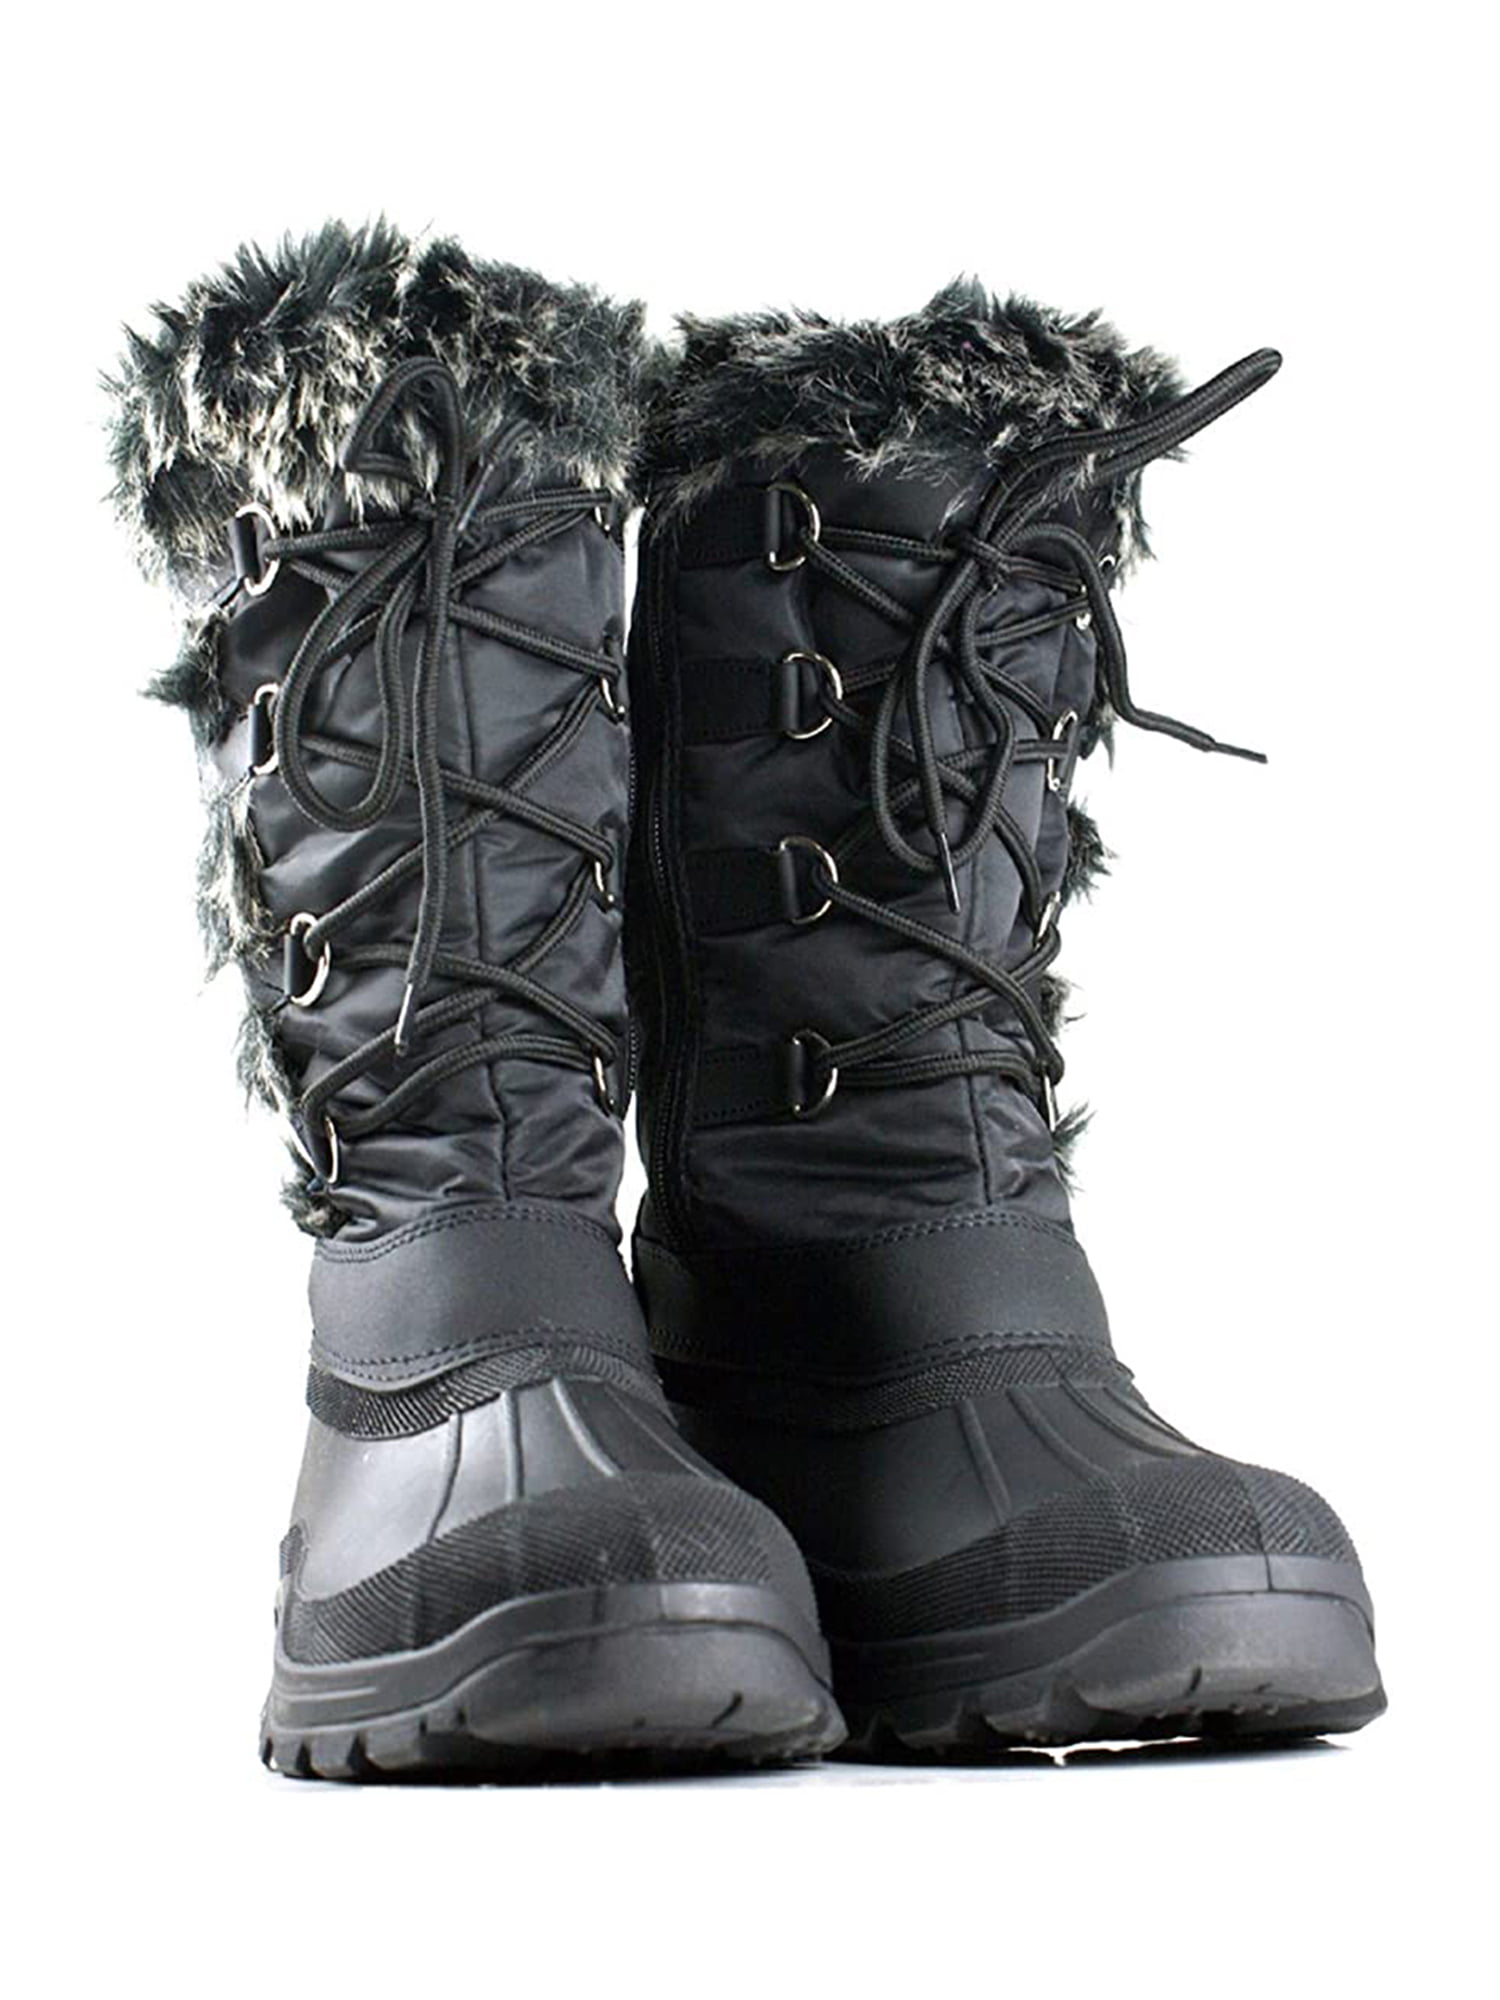 Charmg Winter Boots Warm Snow Boots PU Leather Boots Women Shoes Wedges Non Slip Women Boots